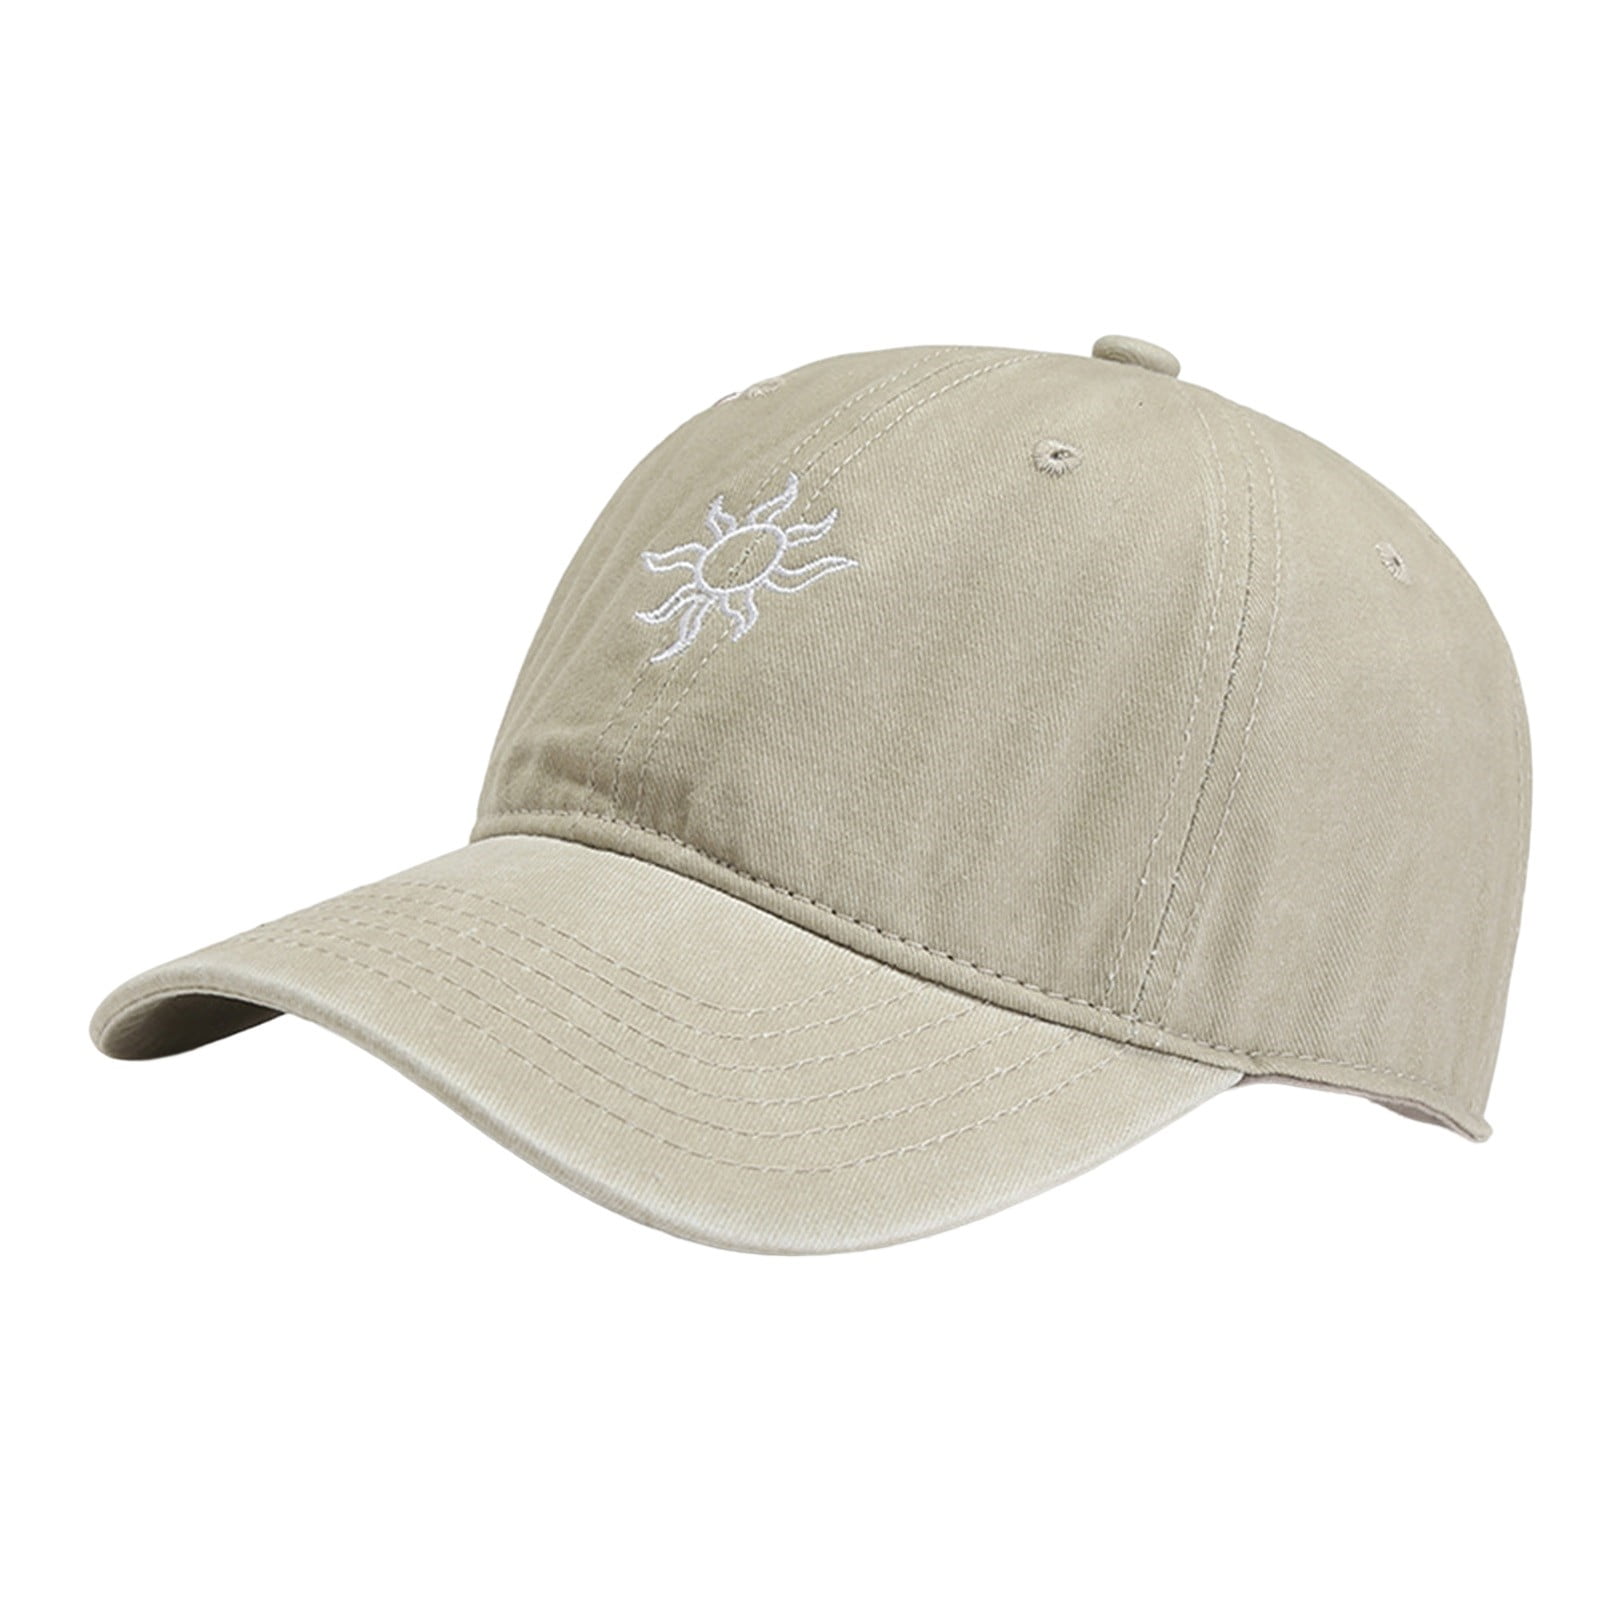 WUE Trucker Hat - Explore The Outdoors - Snapback Hats for Men